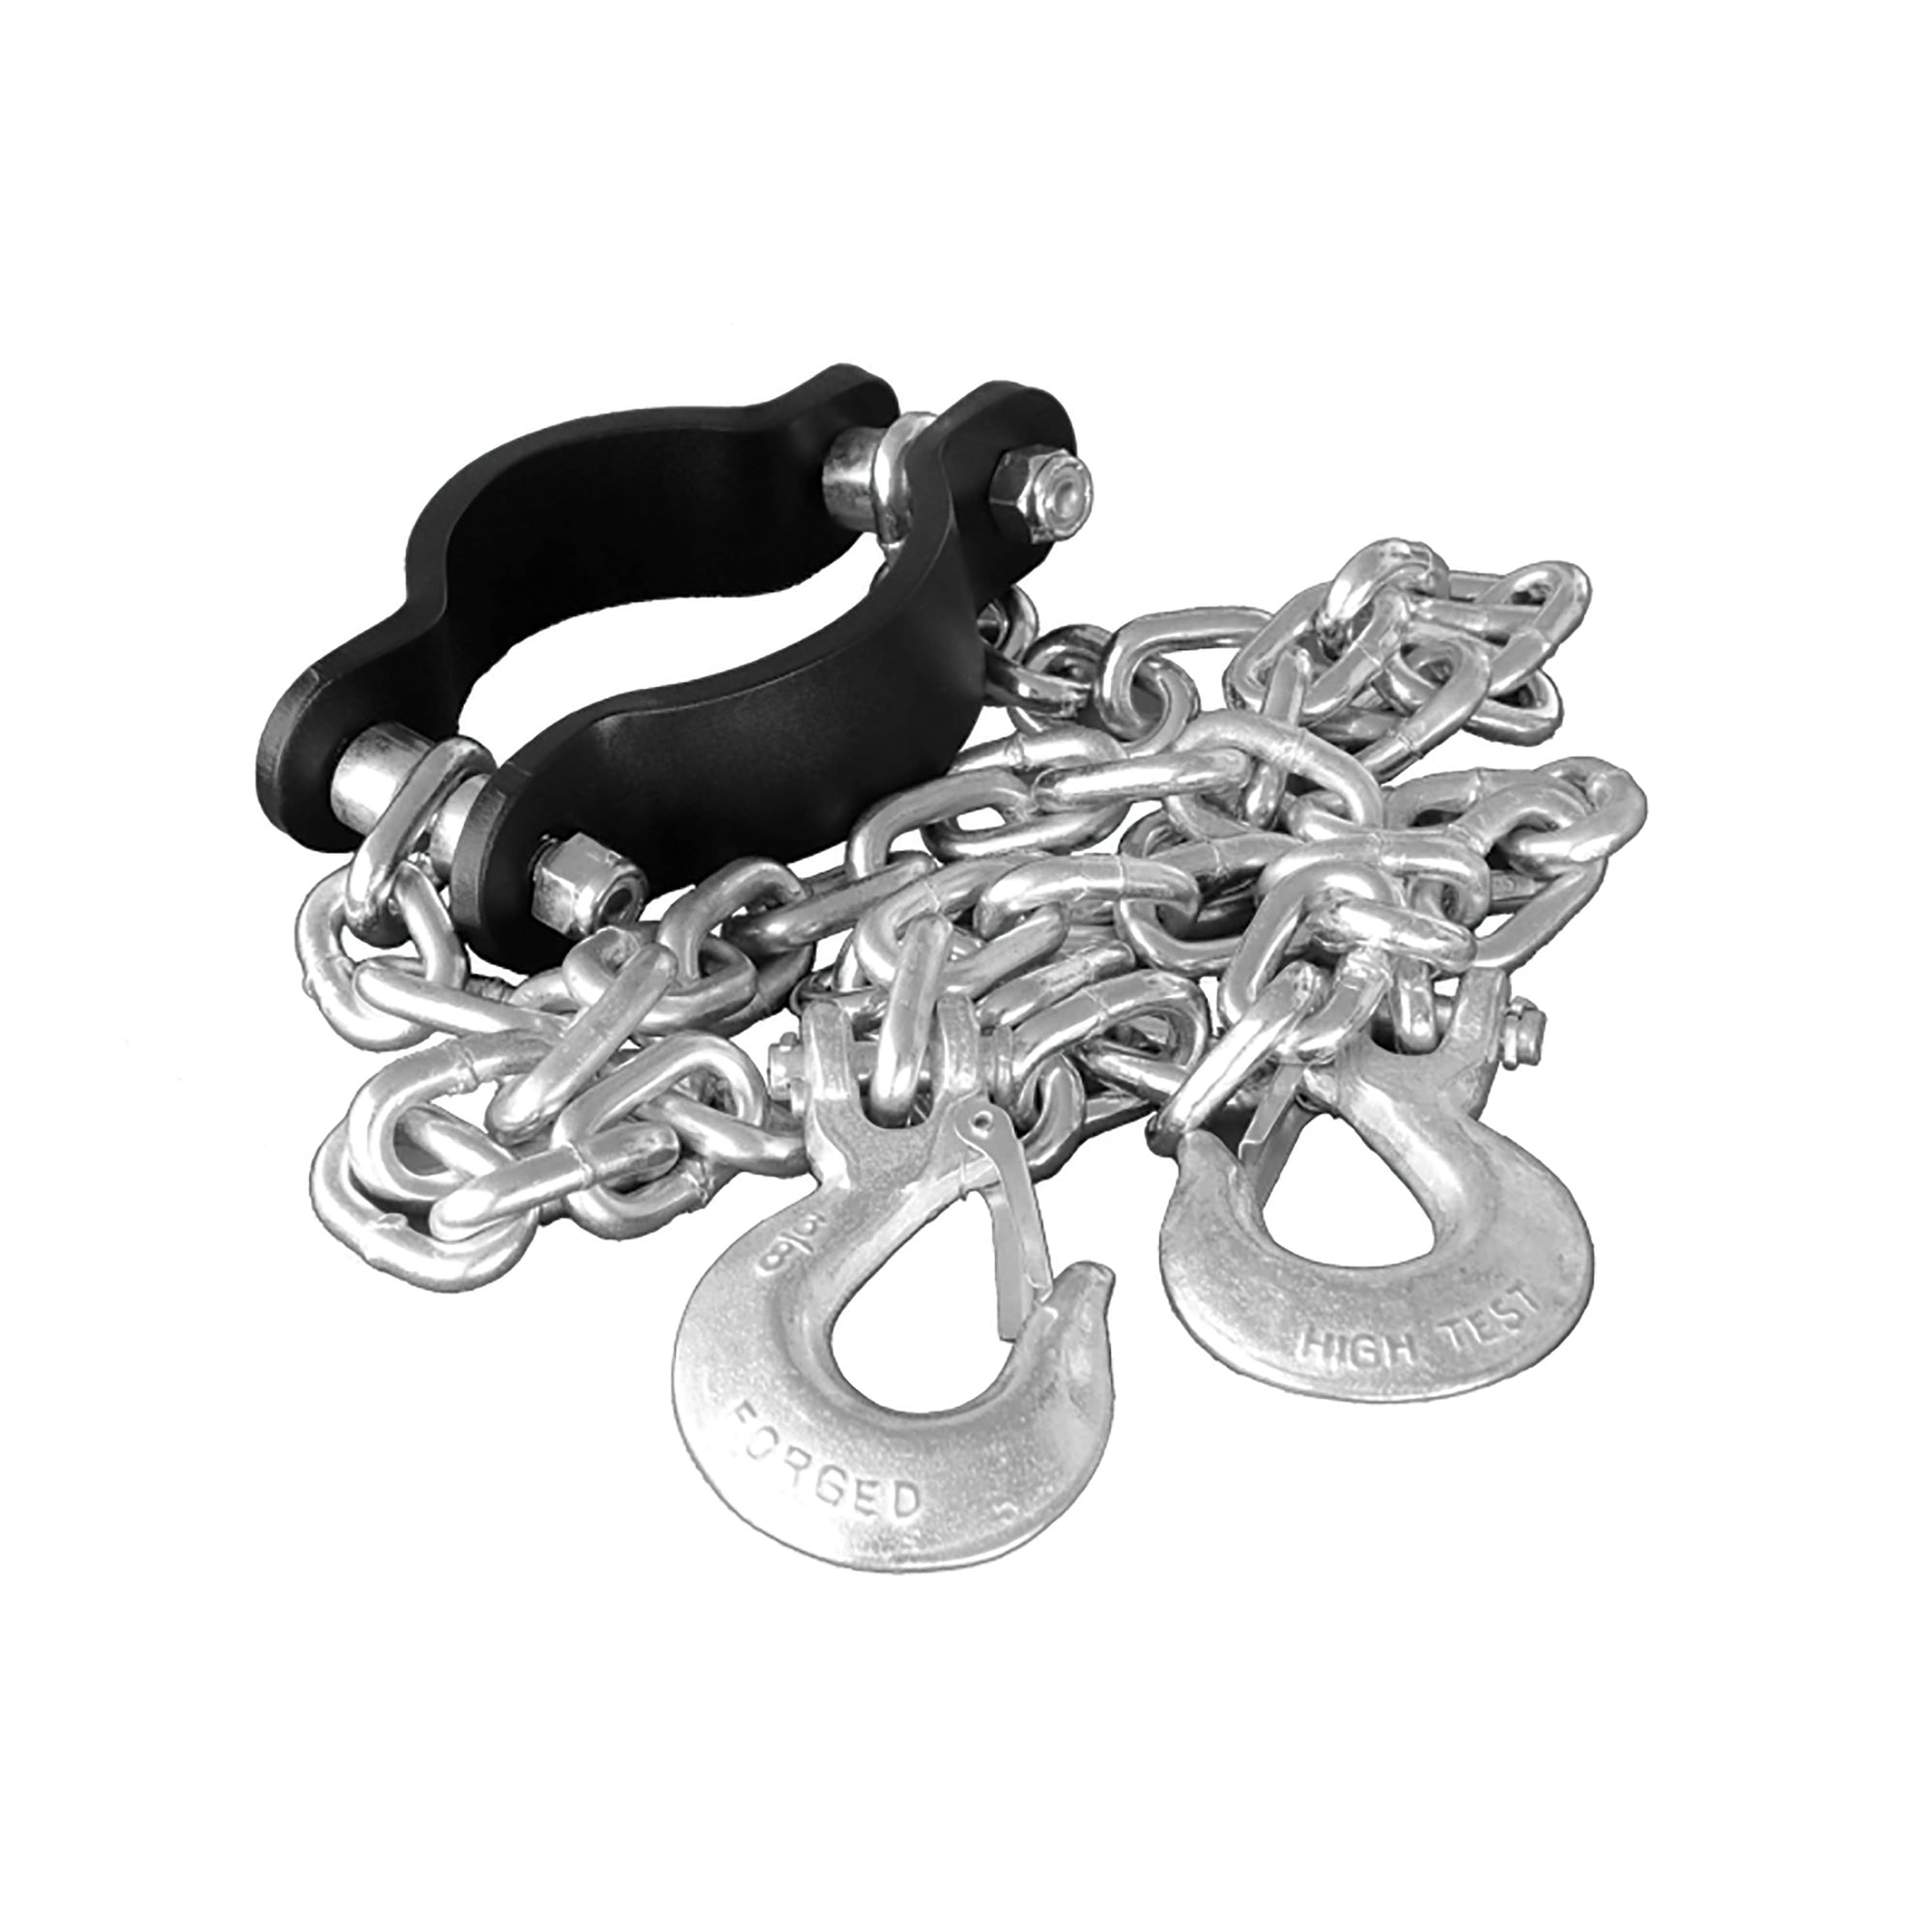 Andersen Hitches 3109 Safety Chains for Ranch Hitch Adapter